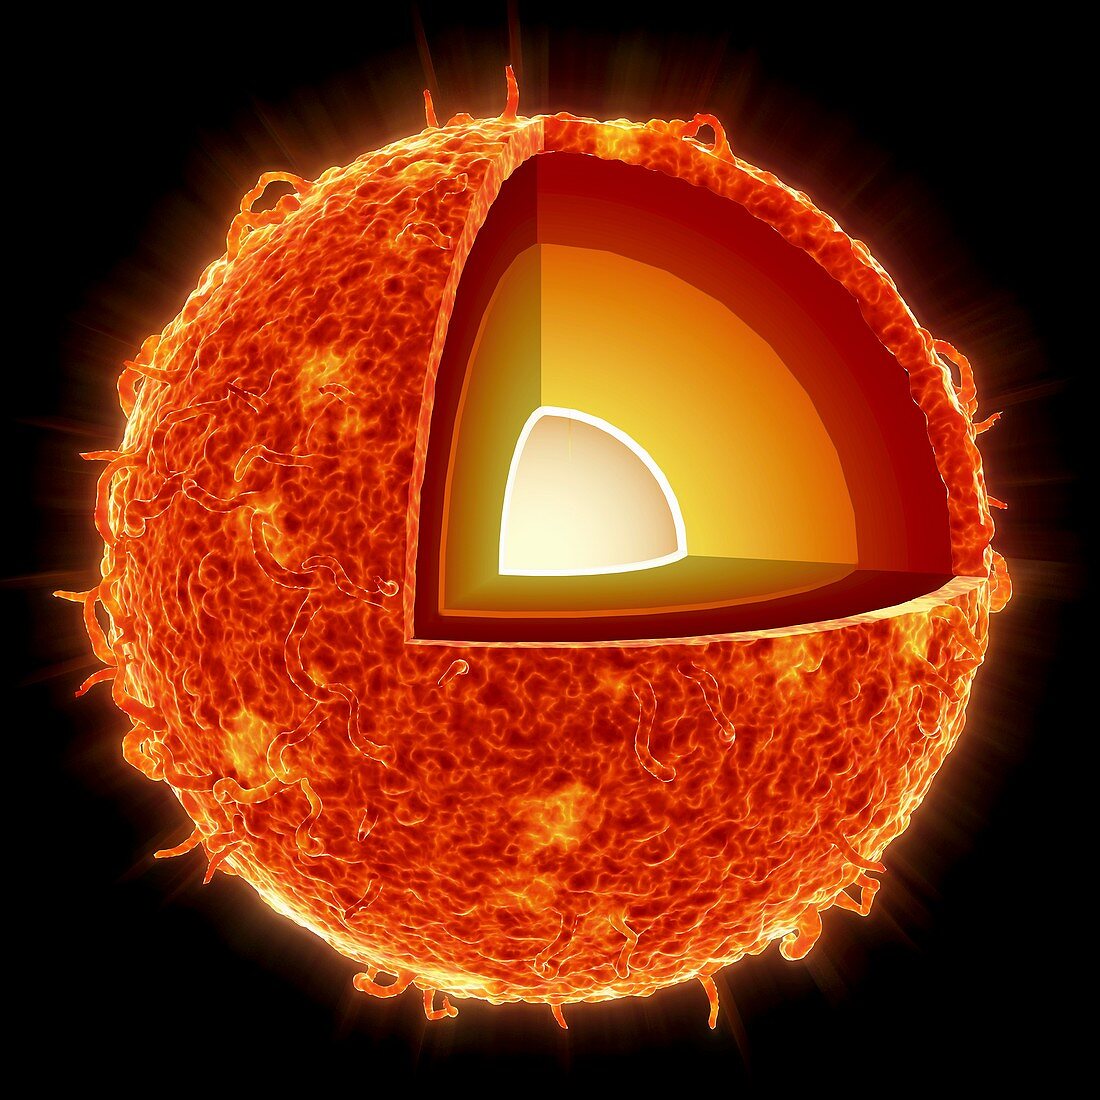 Structure of the Sun, artwork